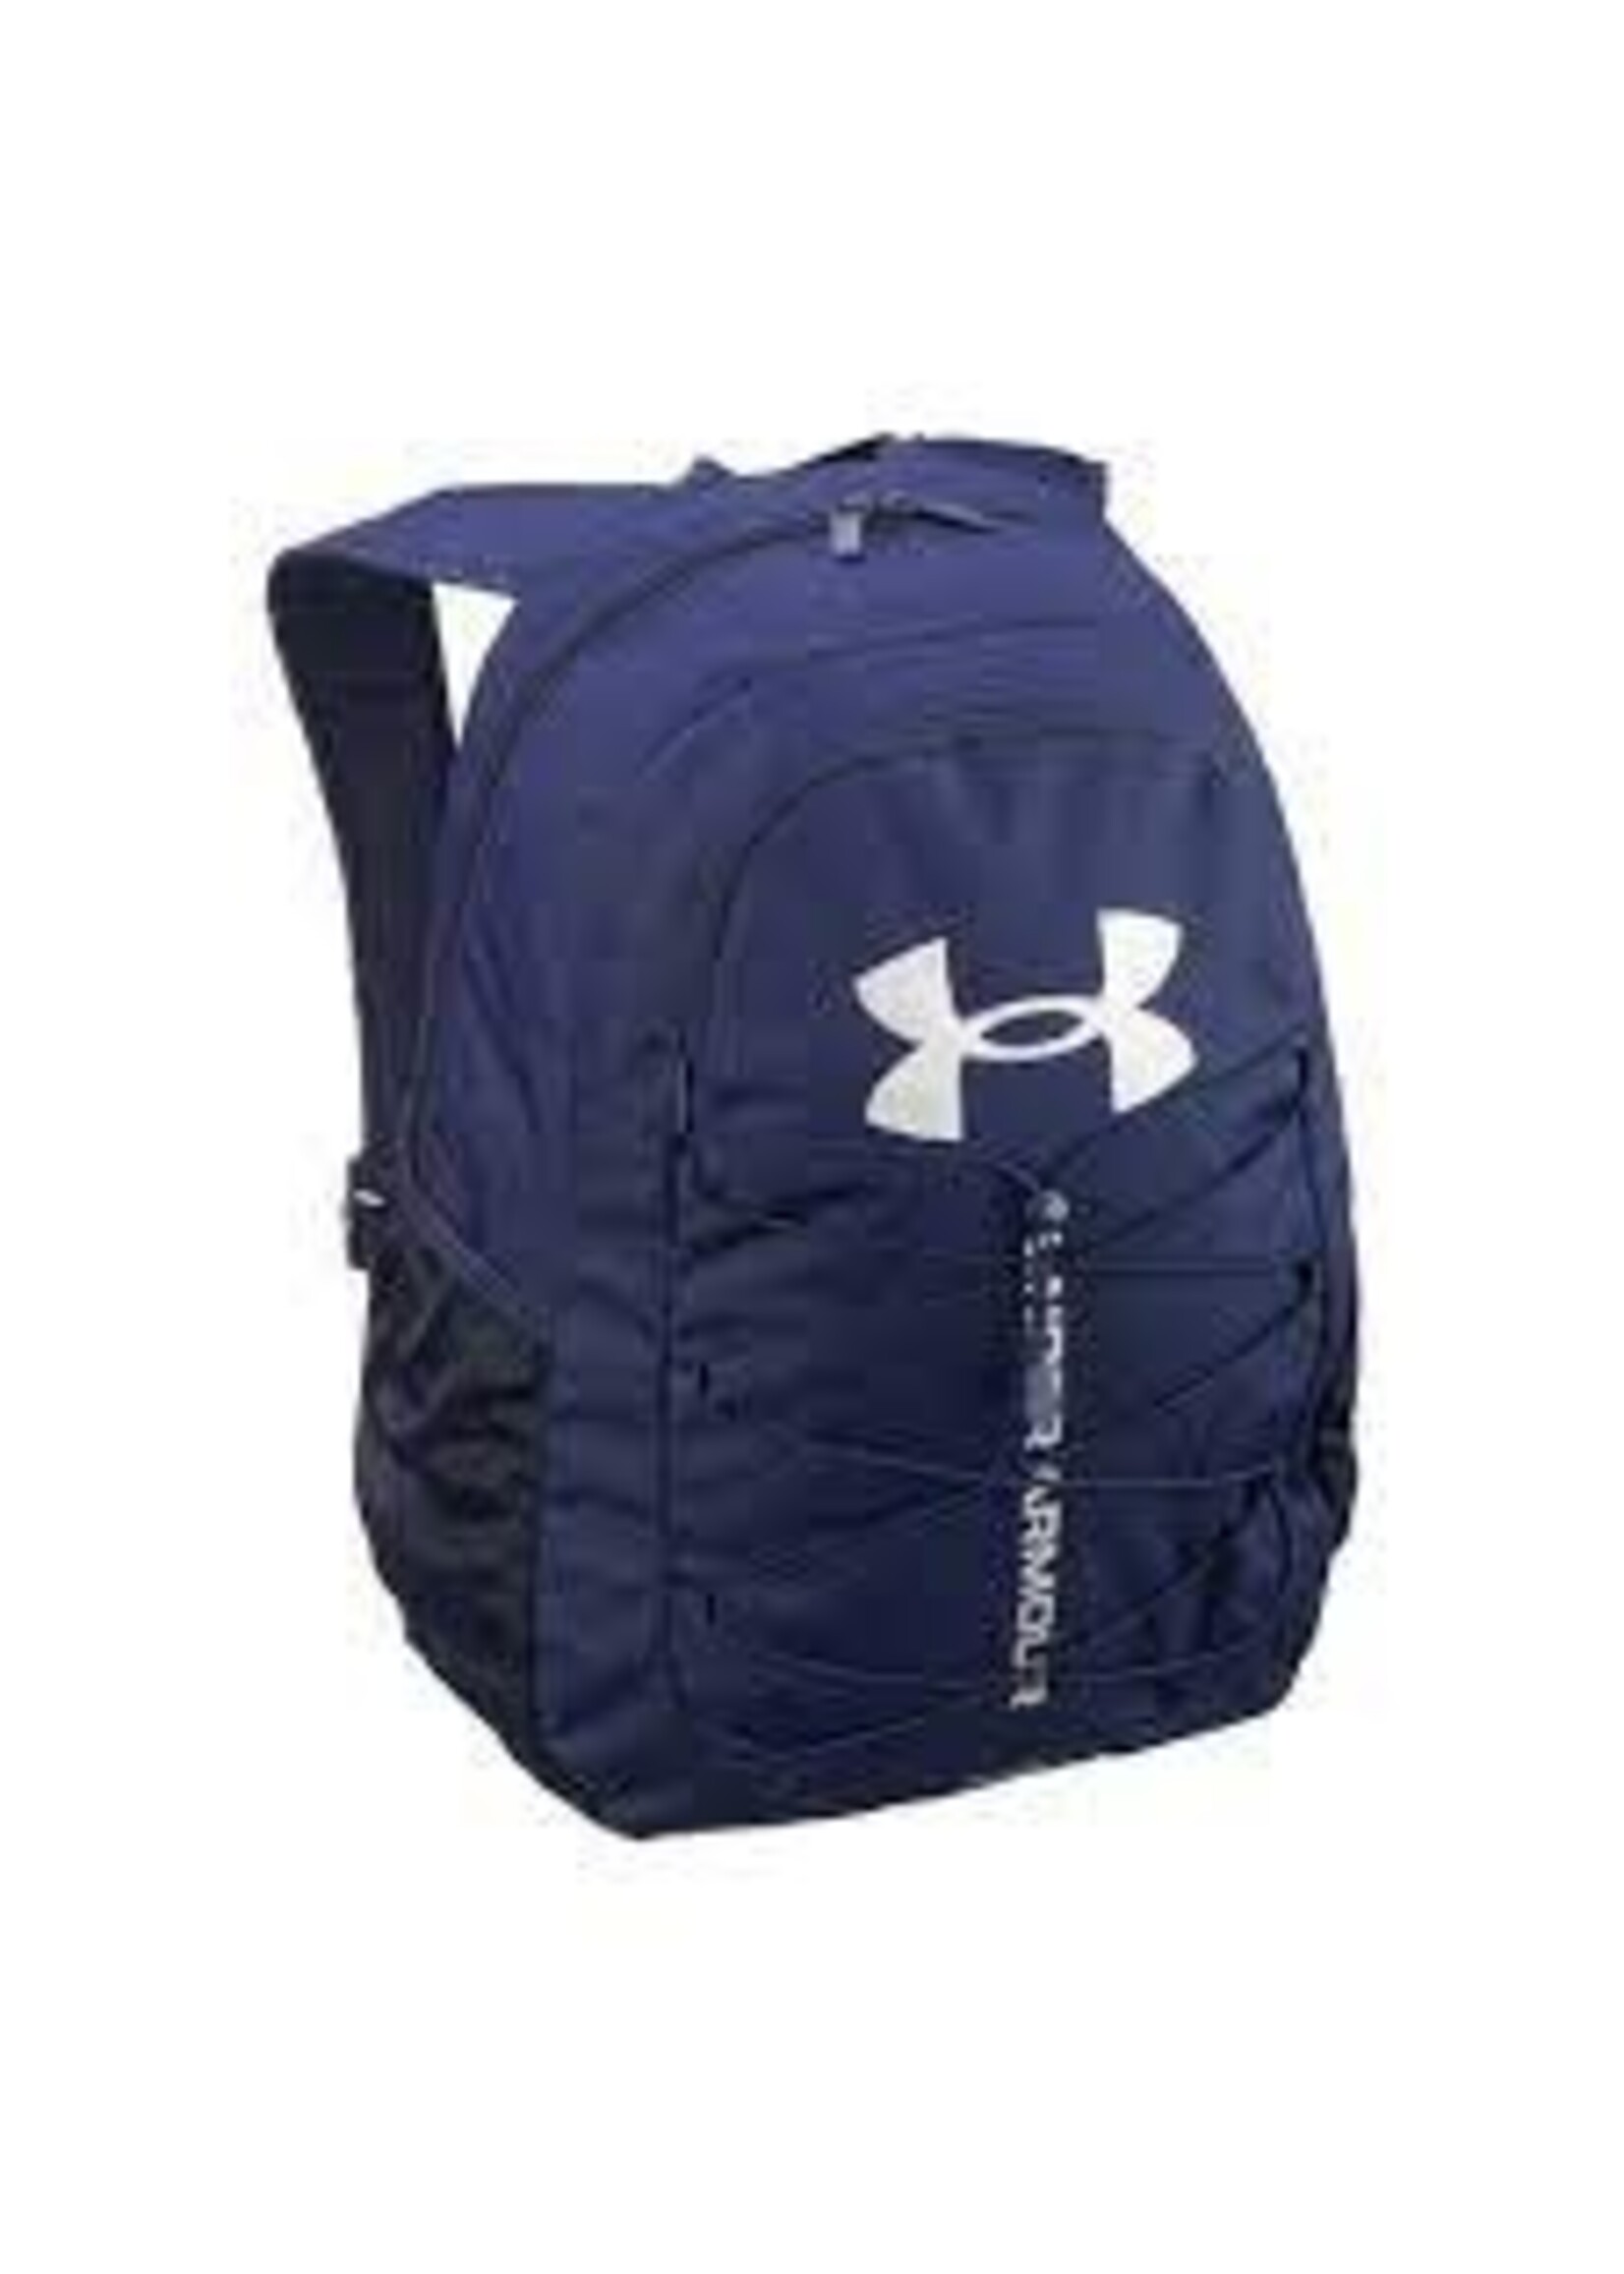 UNDER ARMOUR UNDER ARMOUR HUSTLE SPORT BACKPACK - BLUE